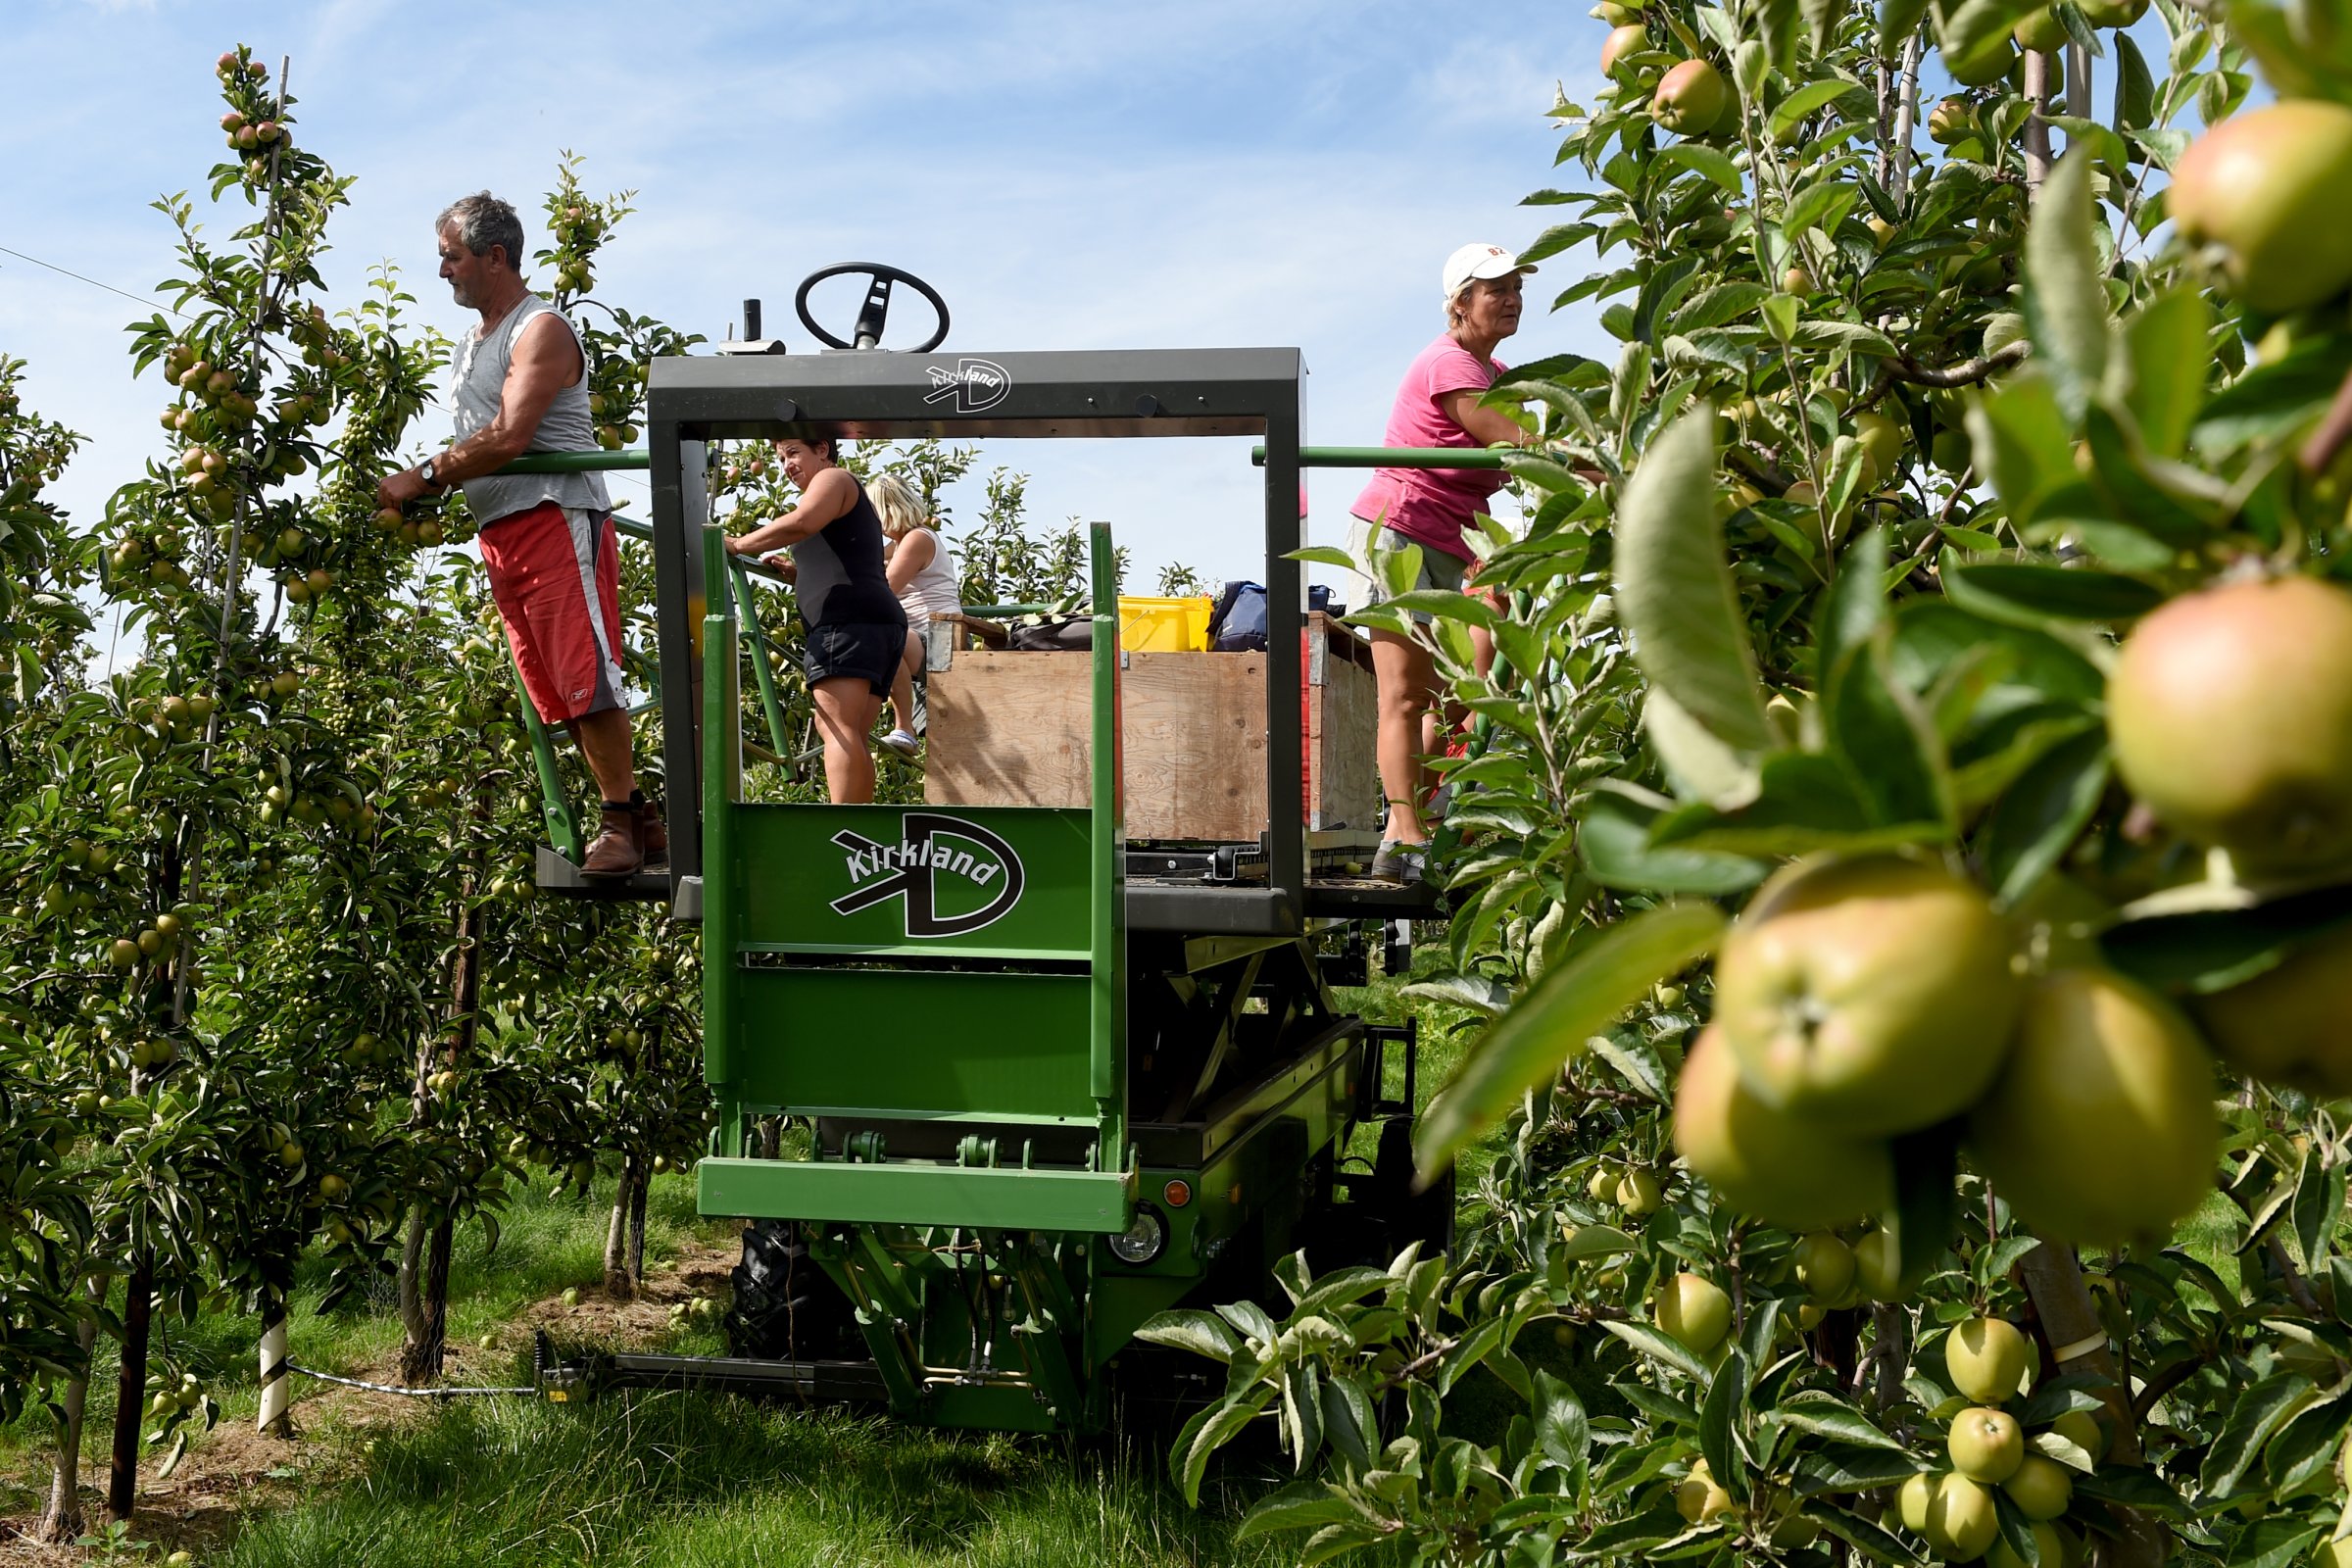 Polish workers on Braeburn apple orchard at Stocks Farm in Worcestershire, England on Aug. 7, 2014.